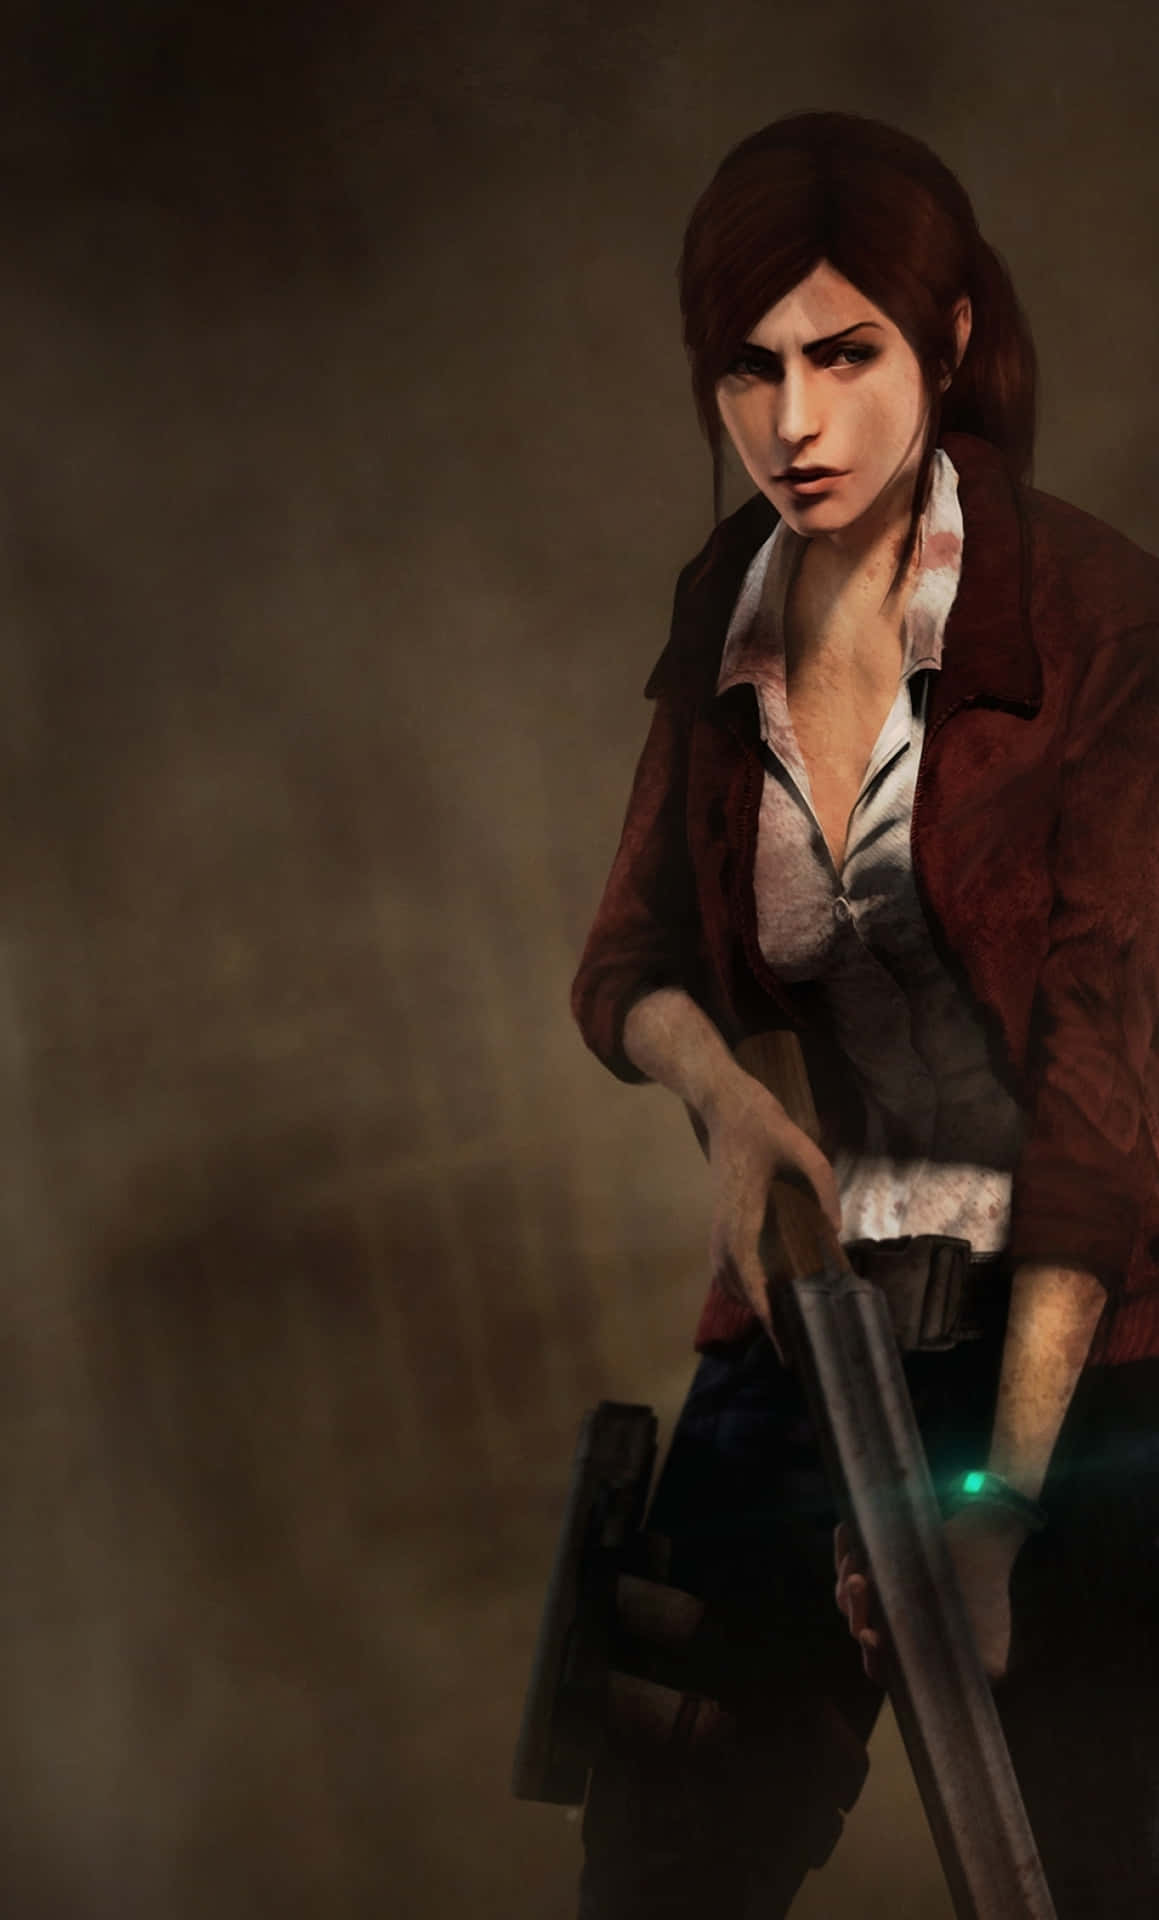 Get ready to battle the undead with Resident Evil on your iPhone Wallpaper